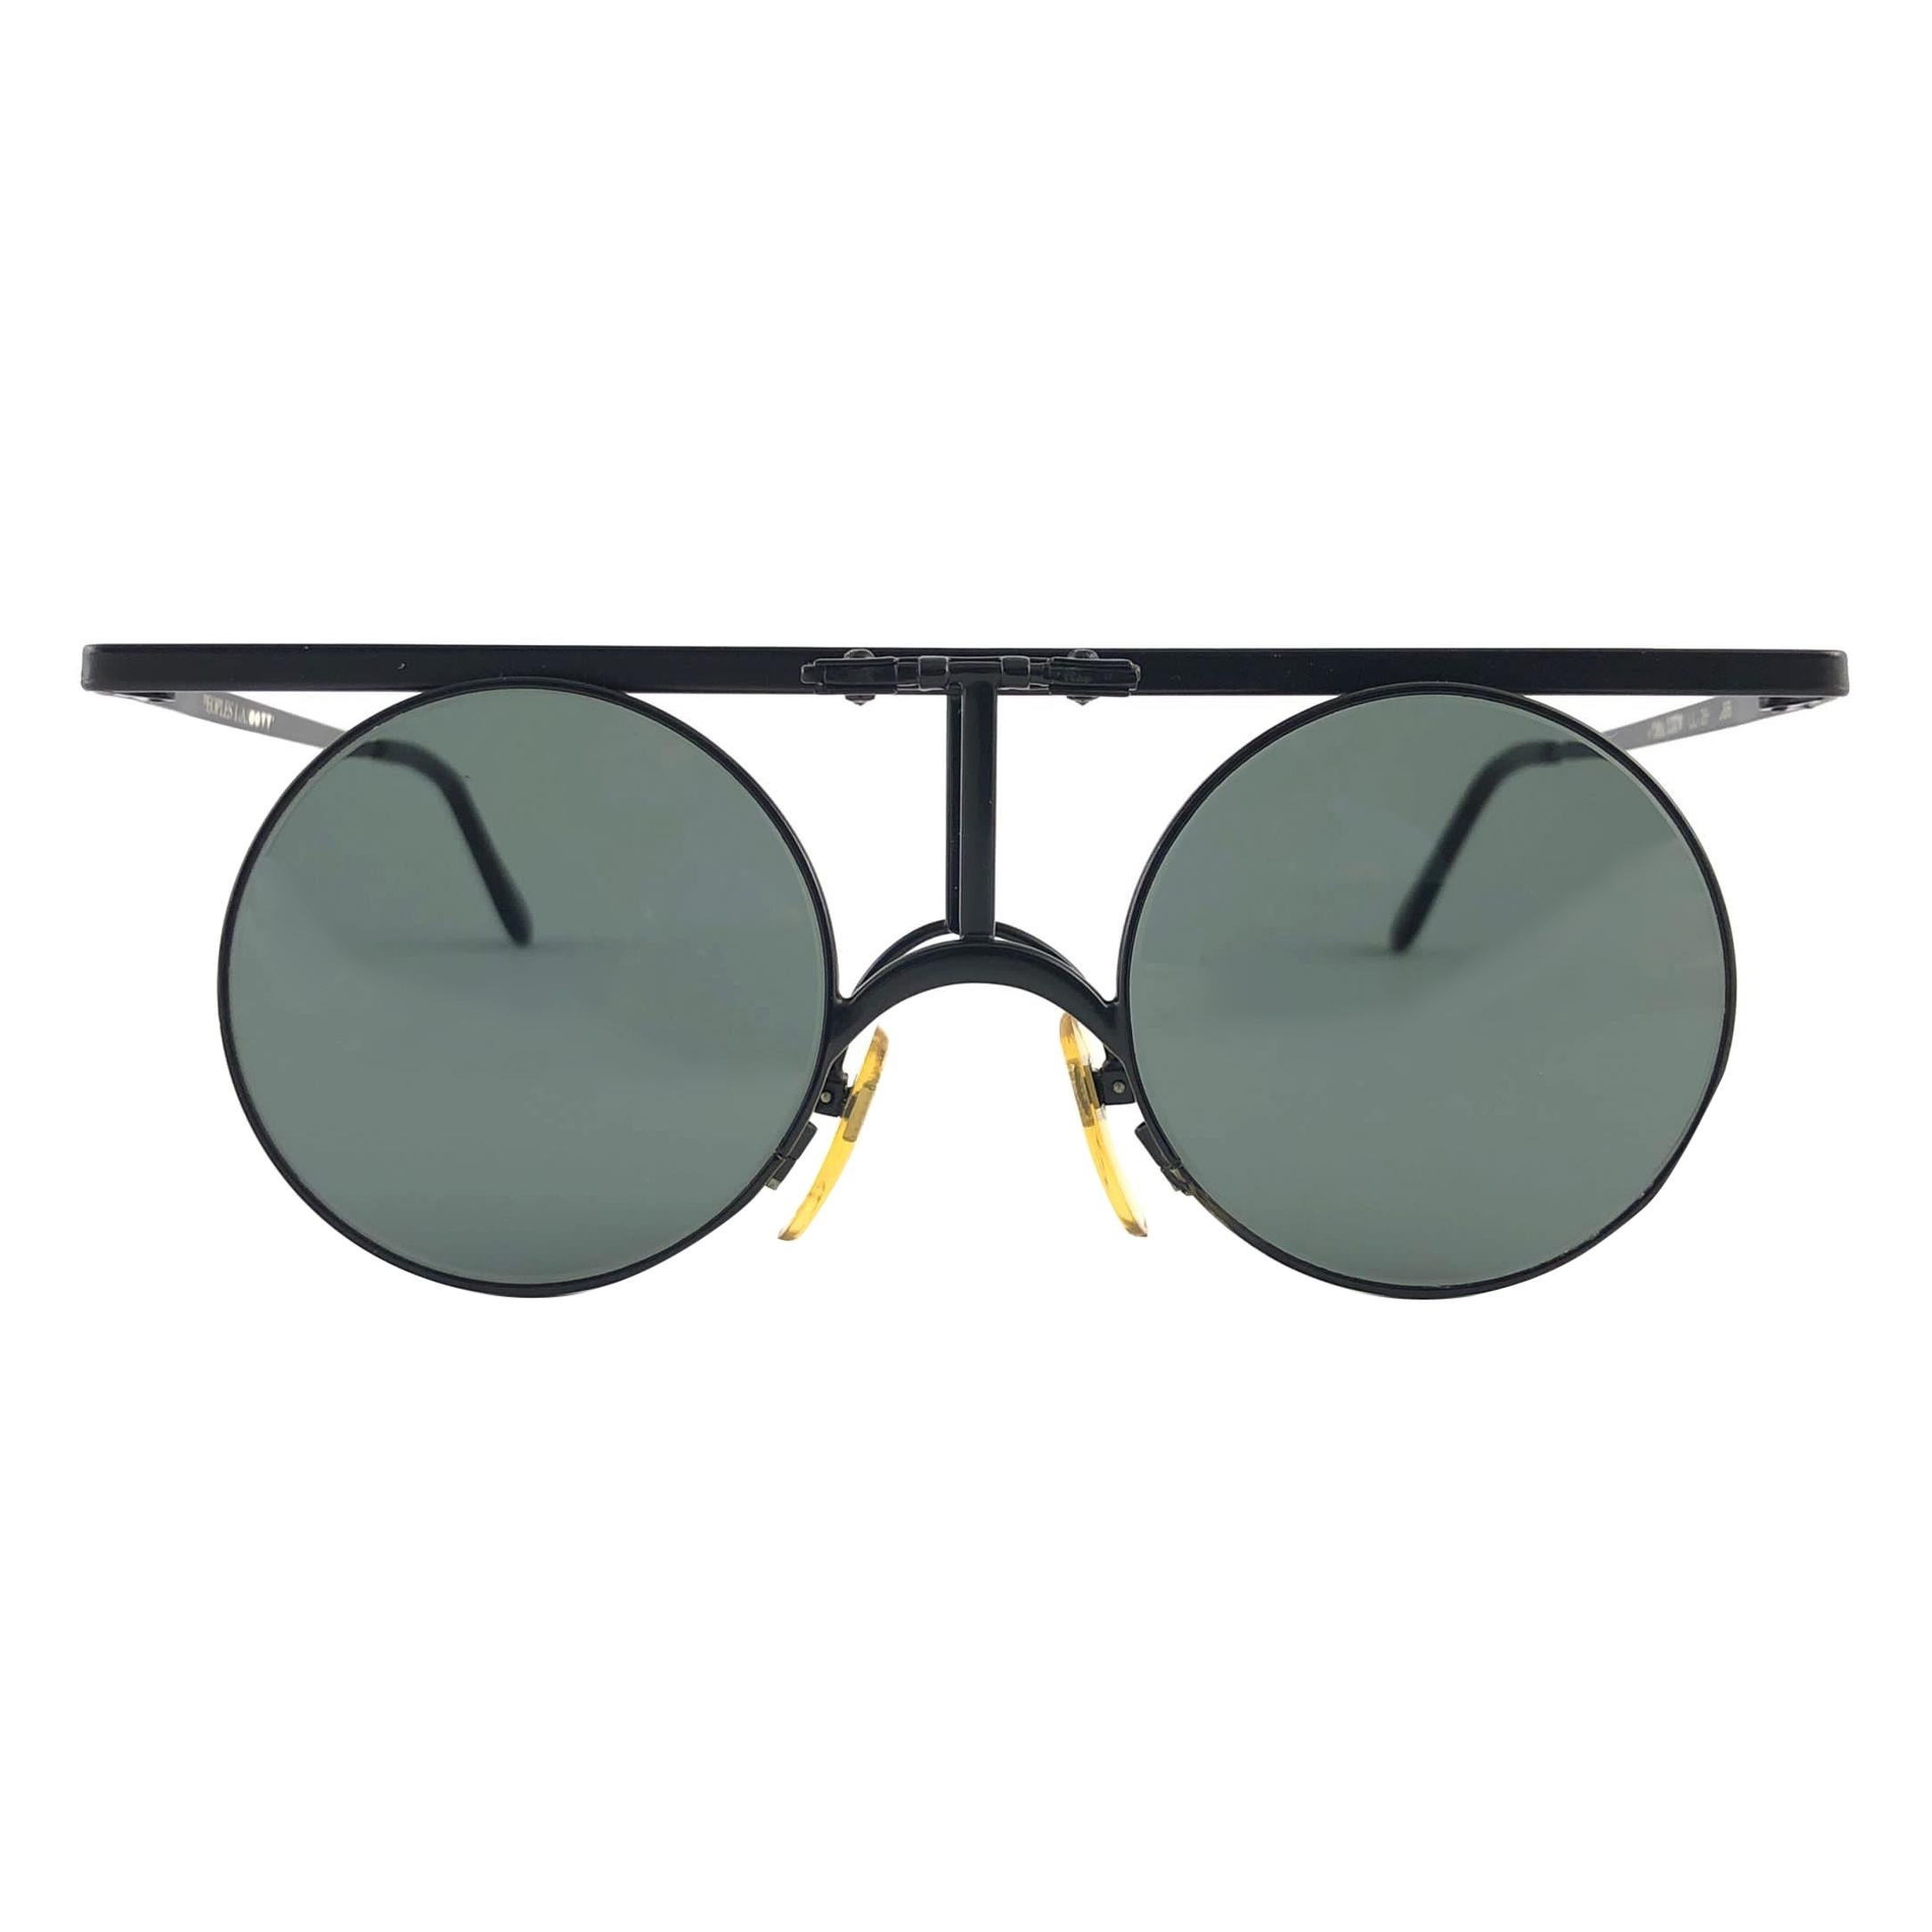 Neue Vintage Ultra Rare and Iconic I'DENTITY für Andy Warhol 1986  Sonnenbrille bei 1stDibs